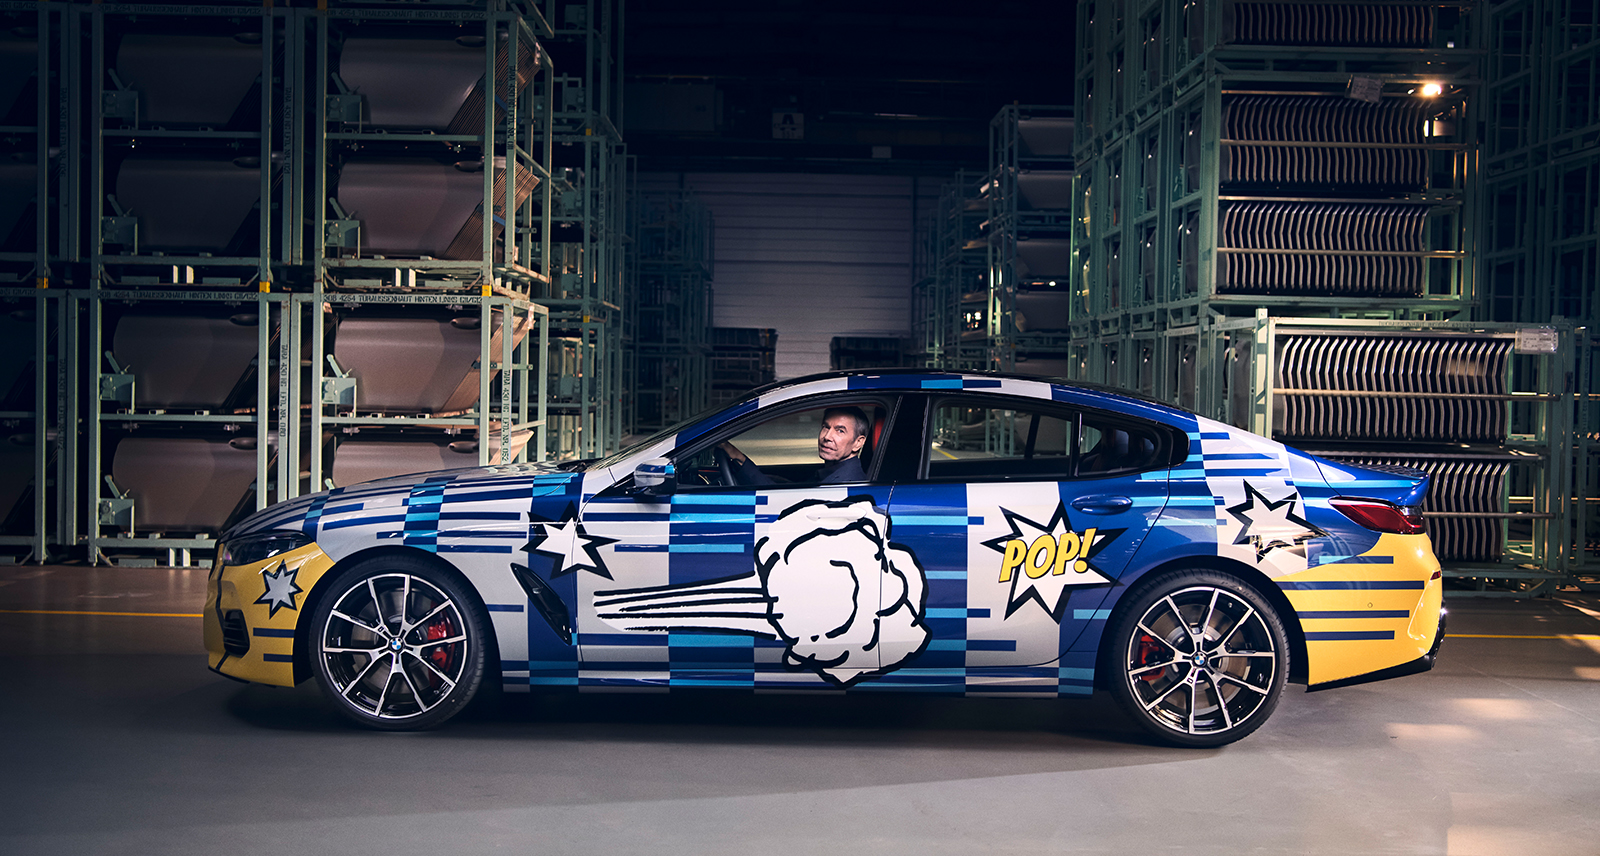 Jeff Koons BMW feature